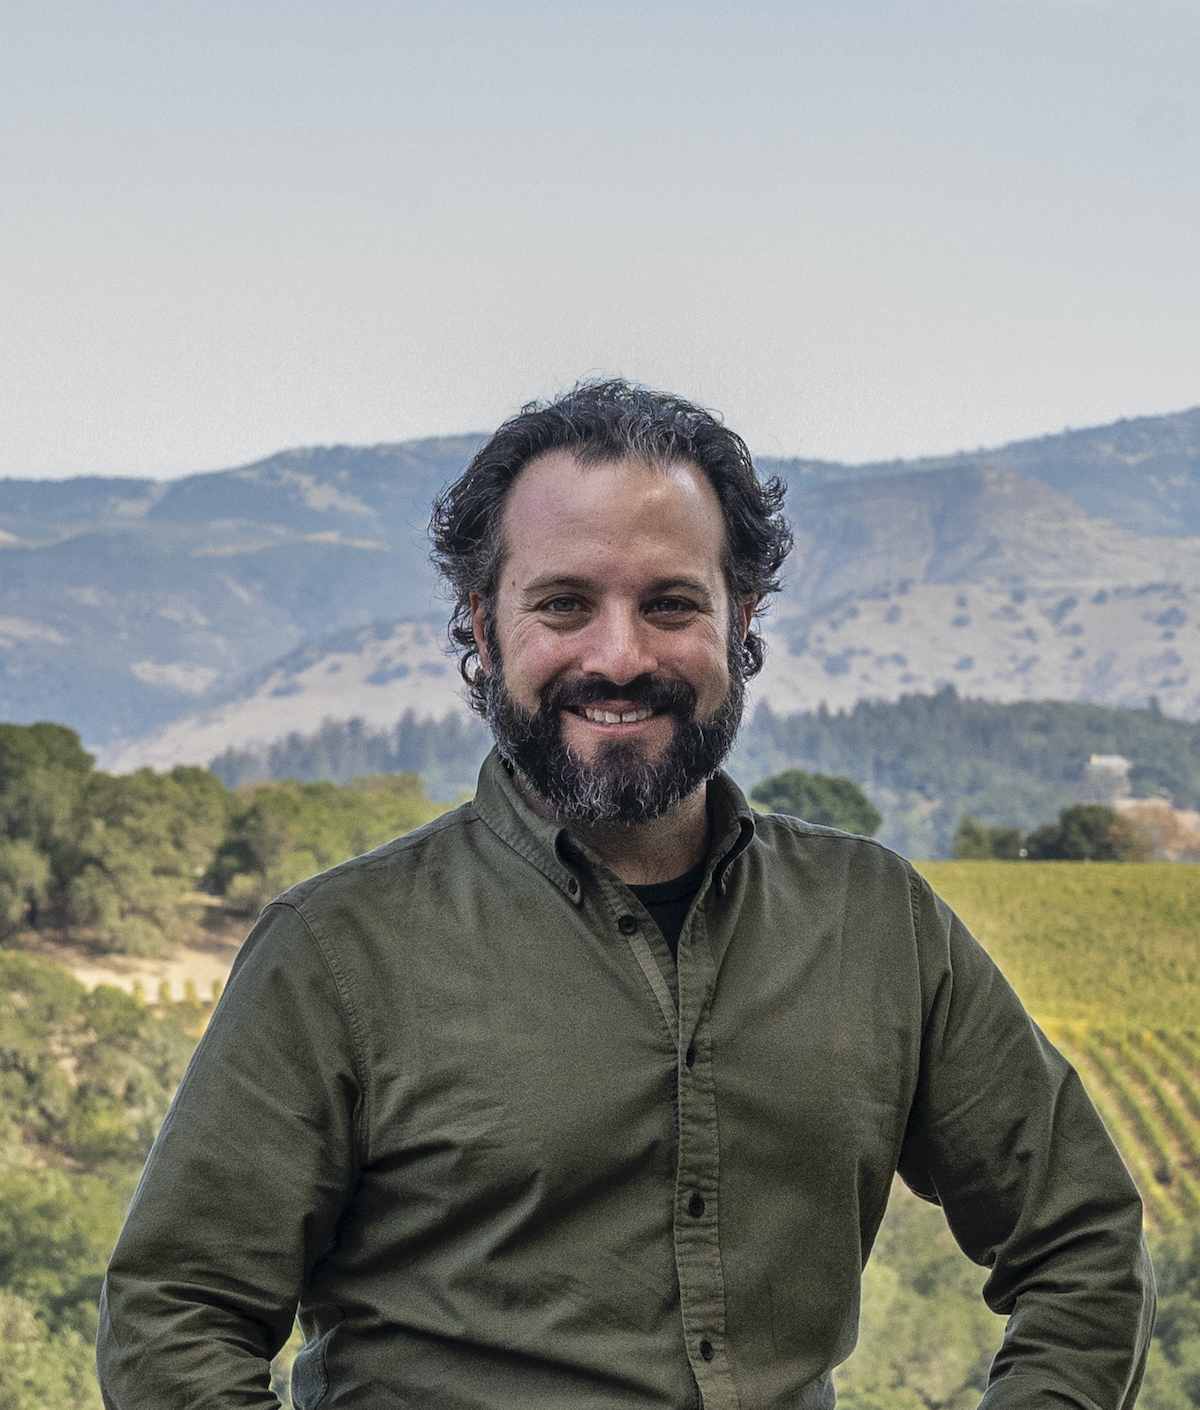 Howie-Kahn-in-Napa-Valley-October-2019-for-a-story.-photo-credit_-Dan-Matthew-Baum_Web